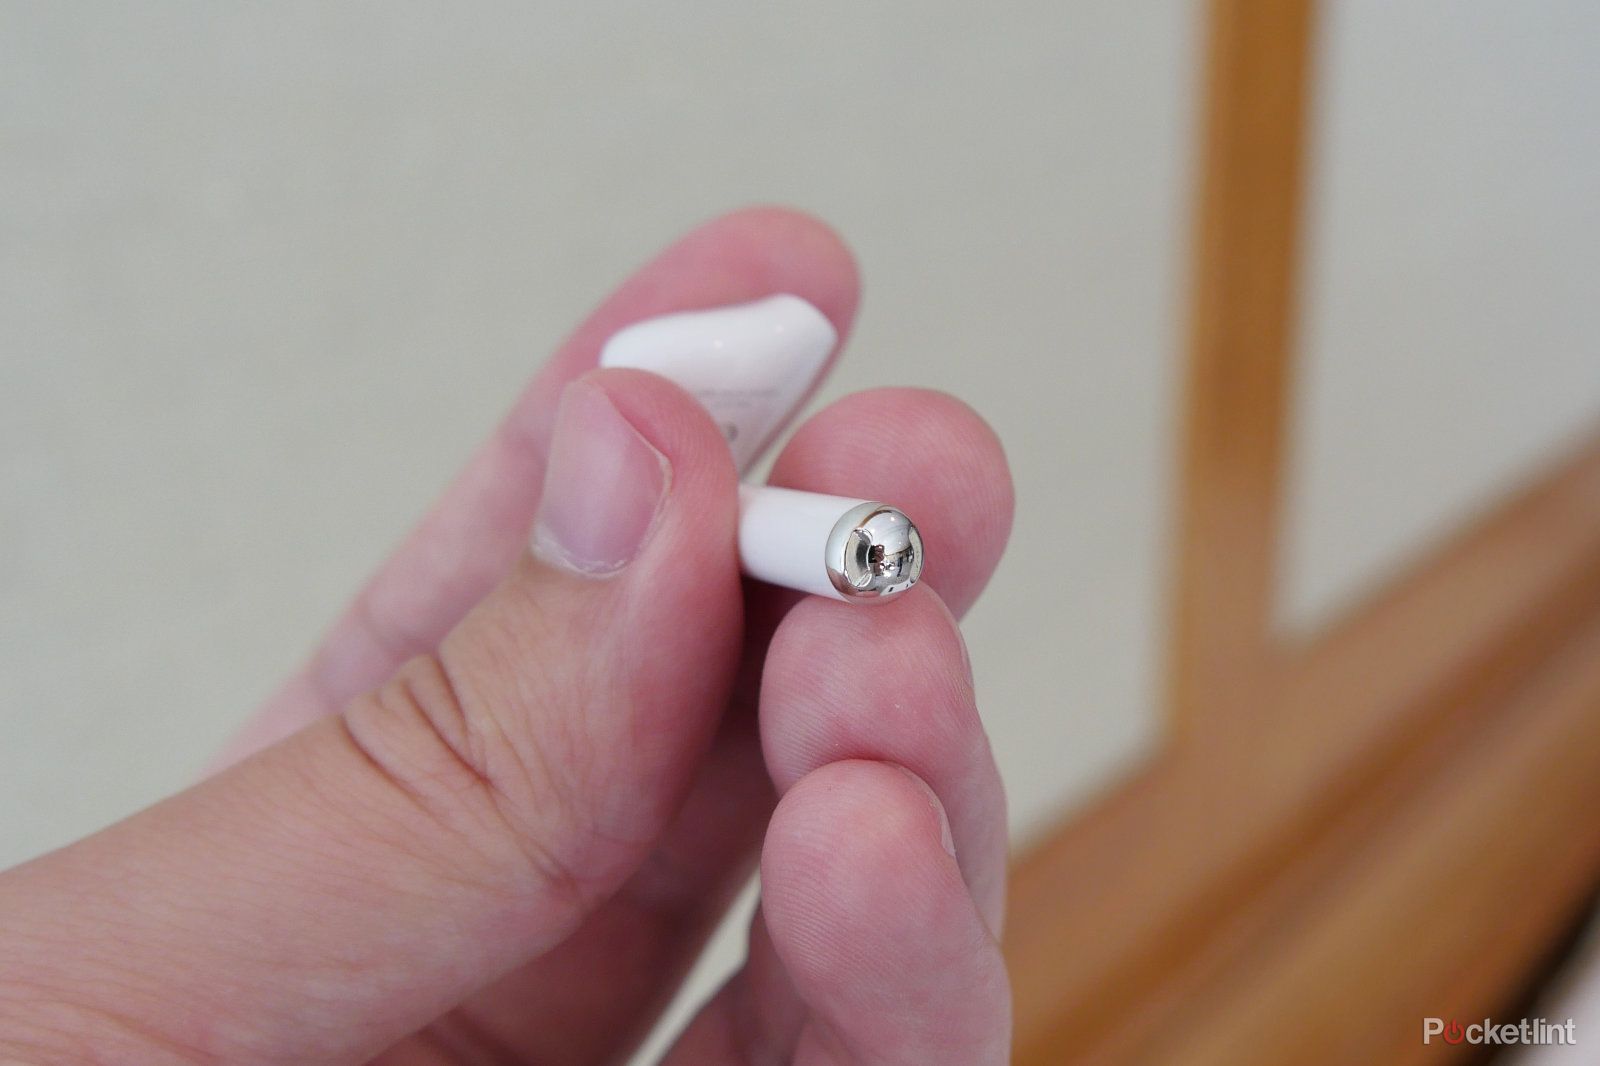 Huawei FreeBuds 3 is new AirPods competitor with added smarts and ANC image 4